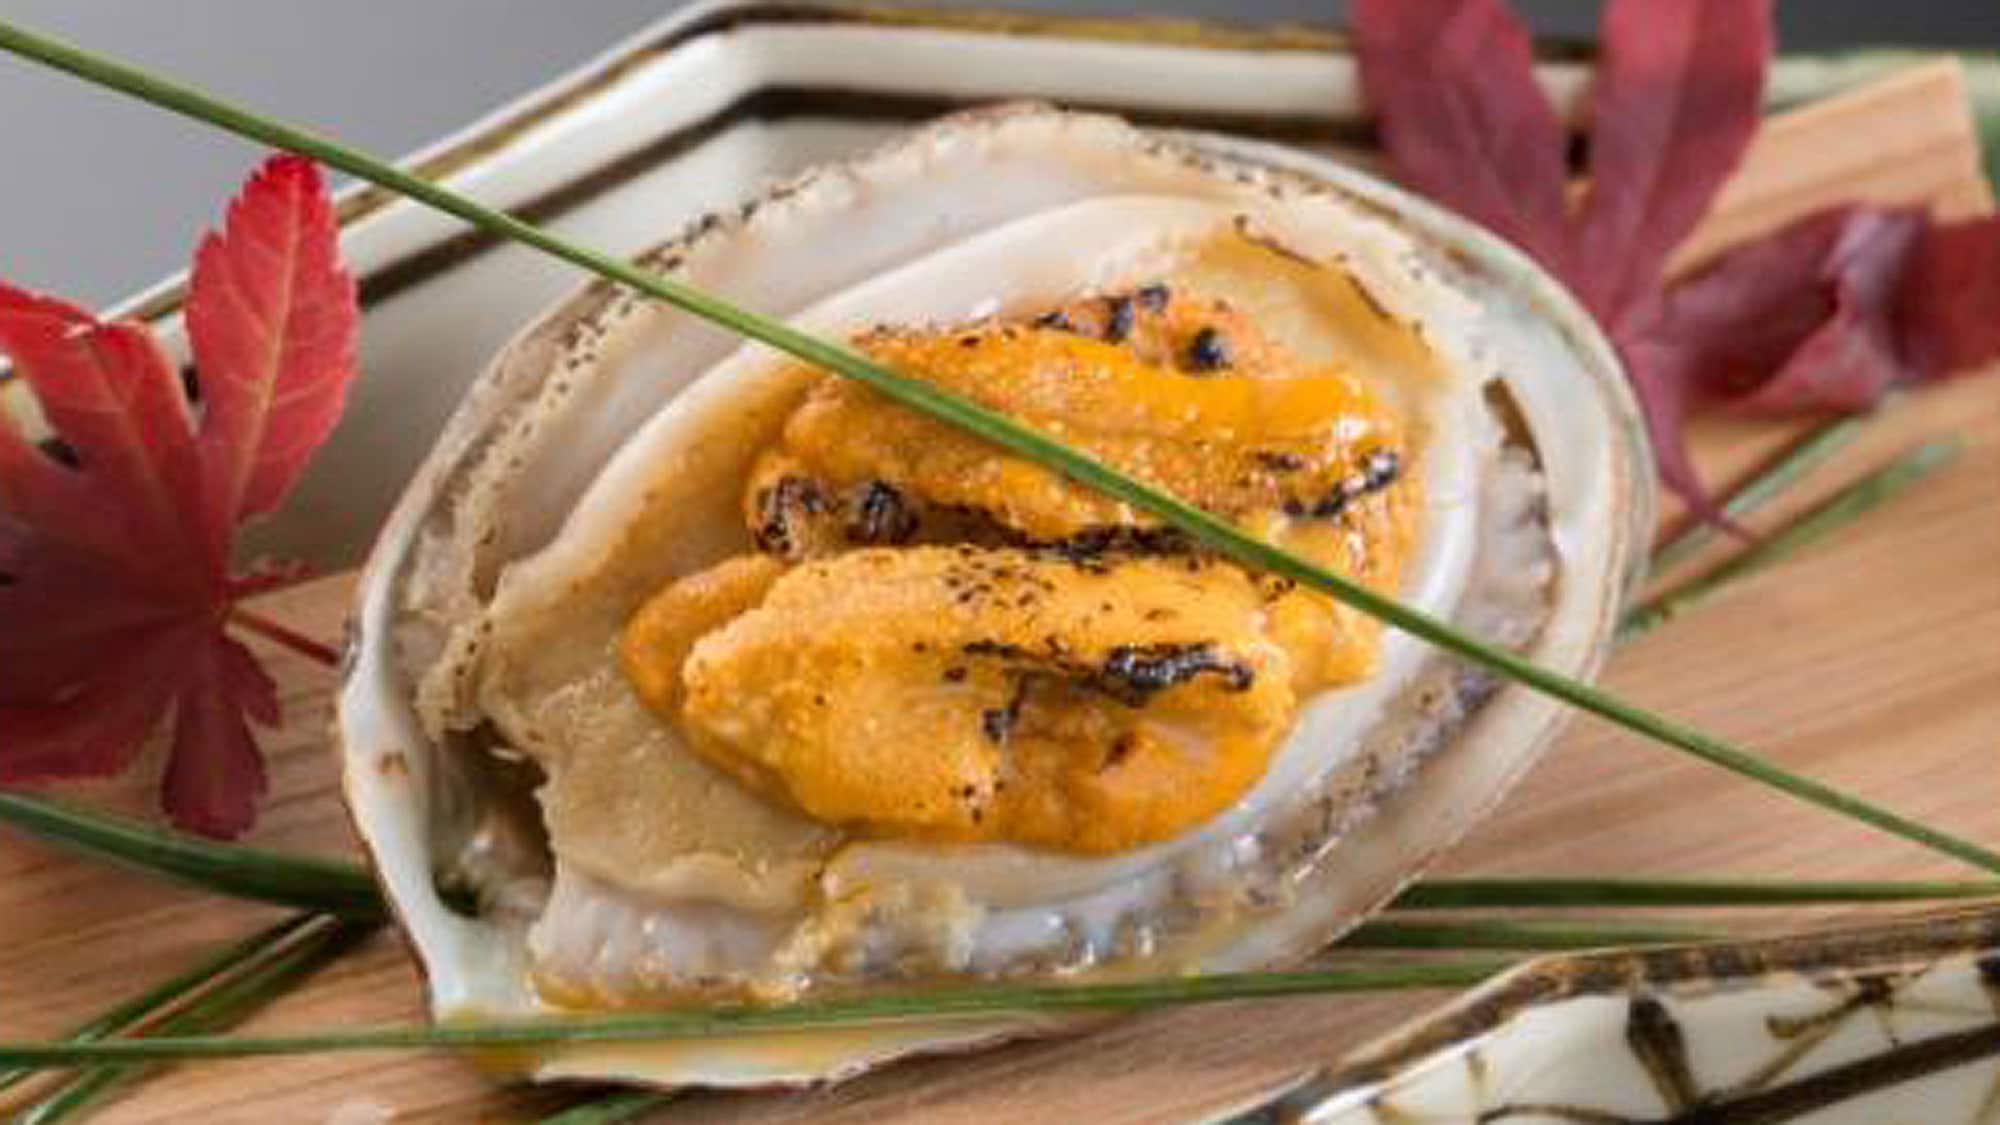 [Grilled sea urchin] A luxurious dish of "abalone" and "sea urchin". * The photo is an image